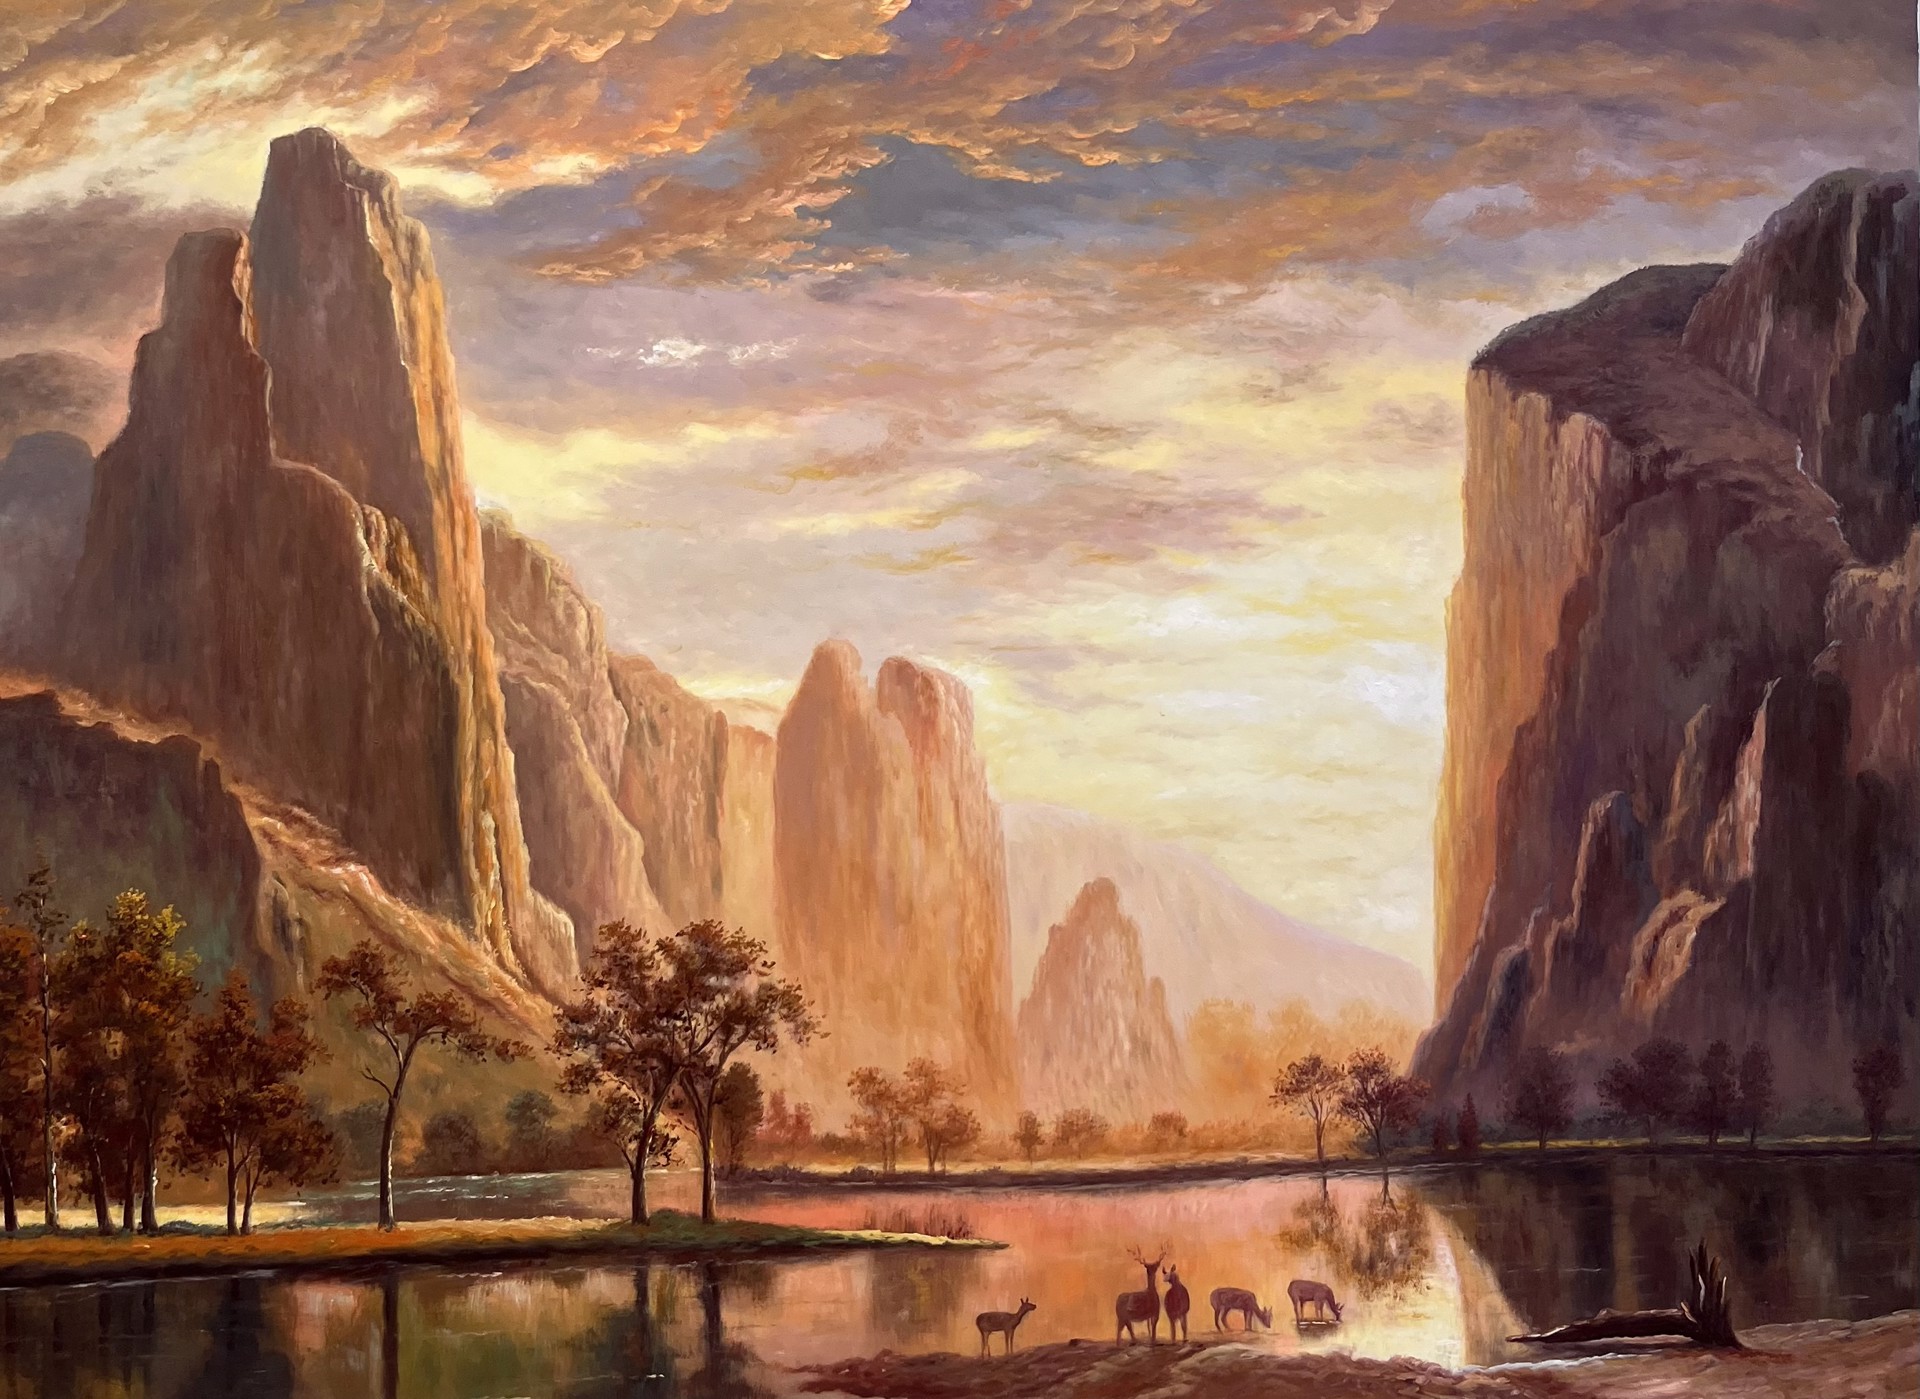 Valley of the Yosimite by In the manner of Albert Bierstadt